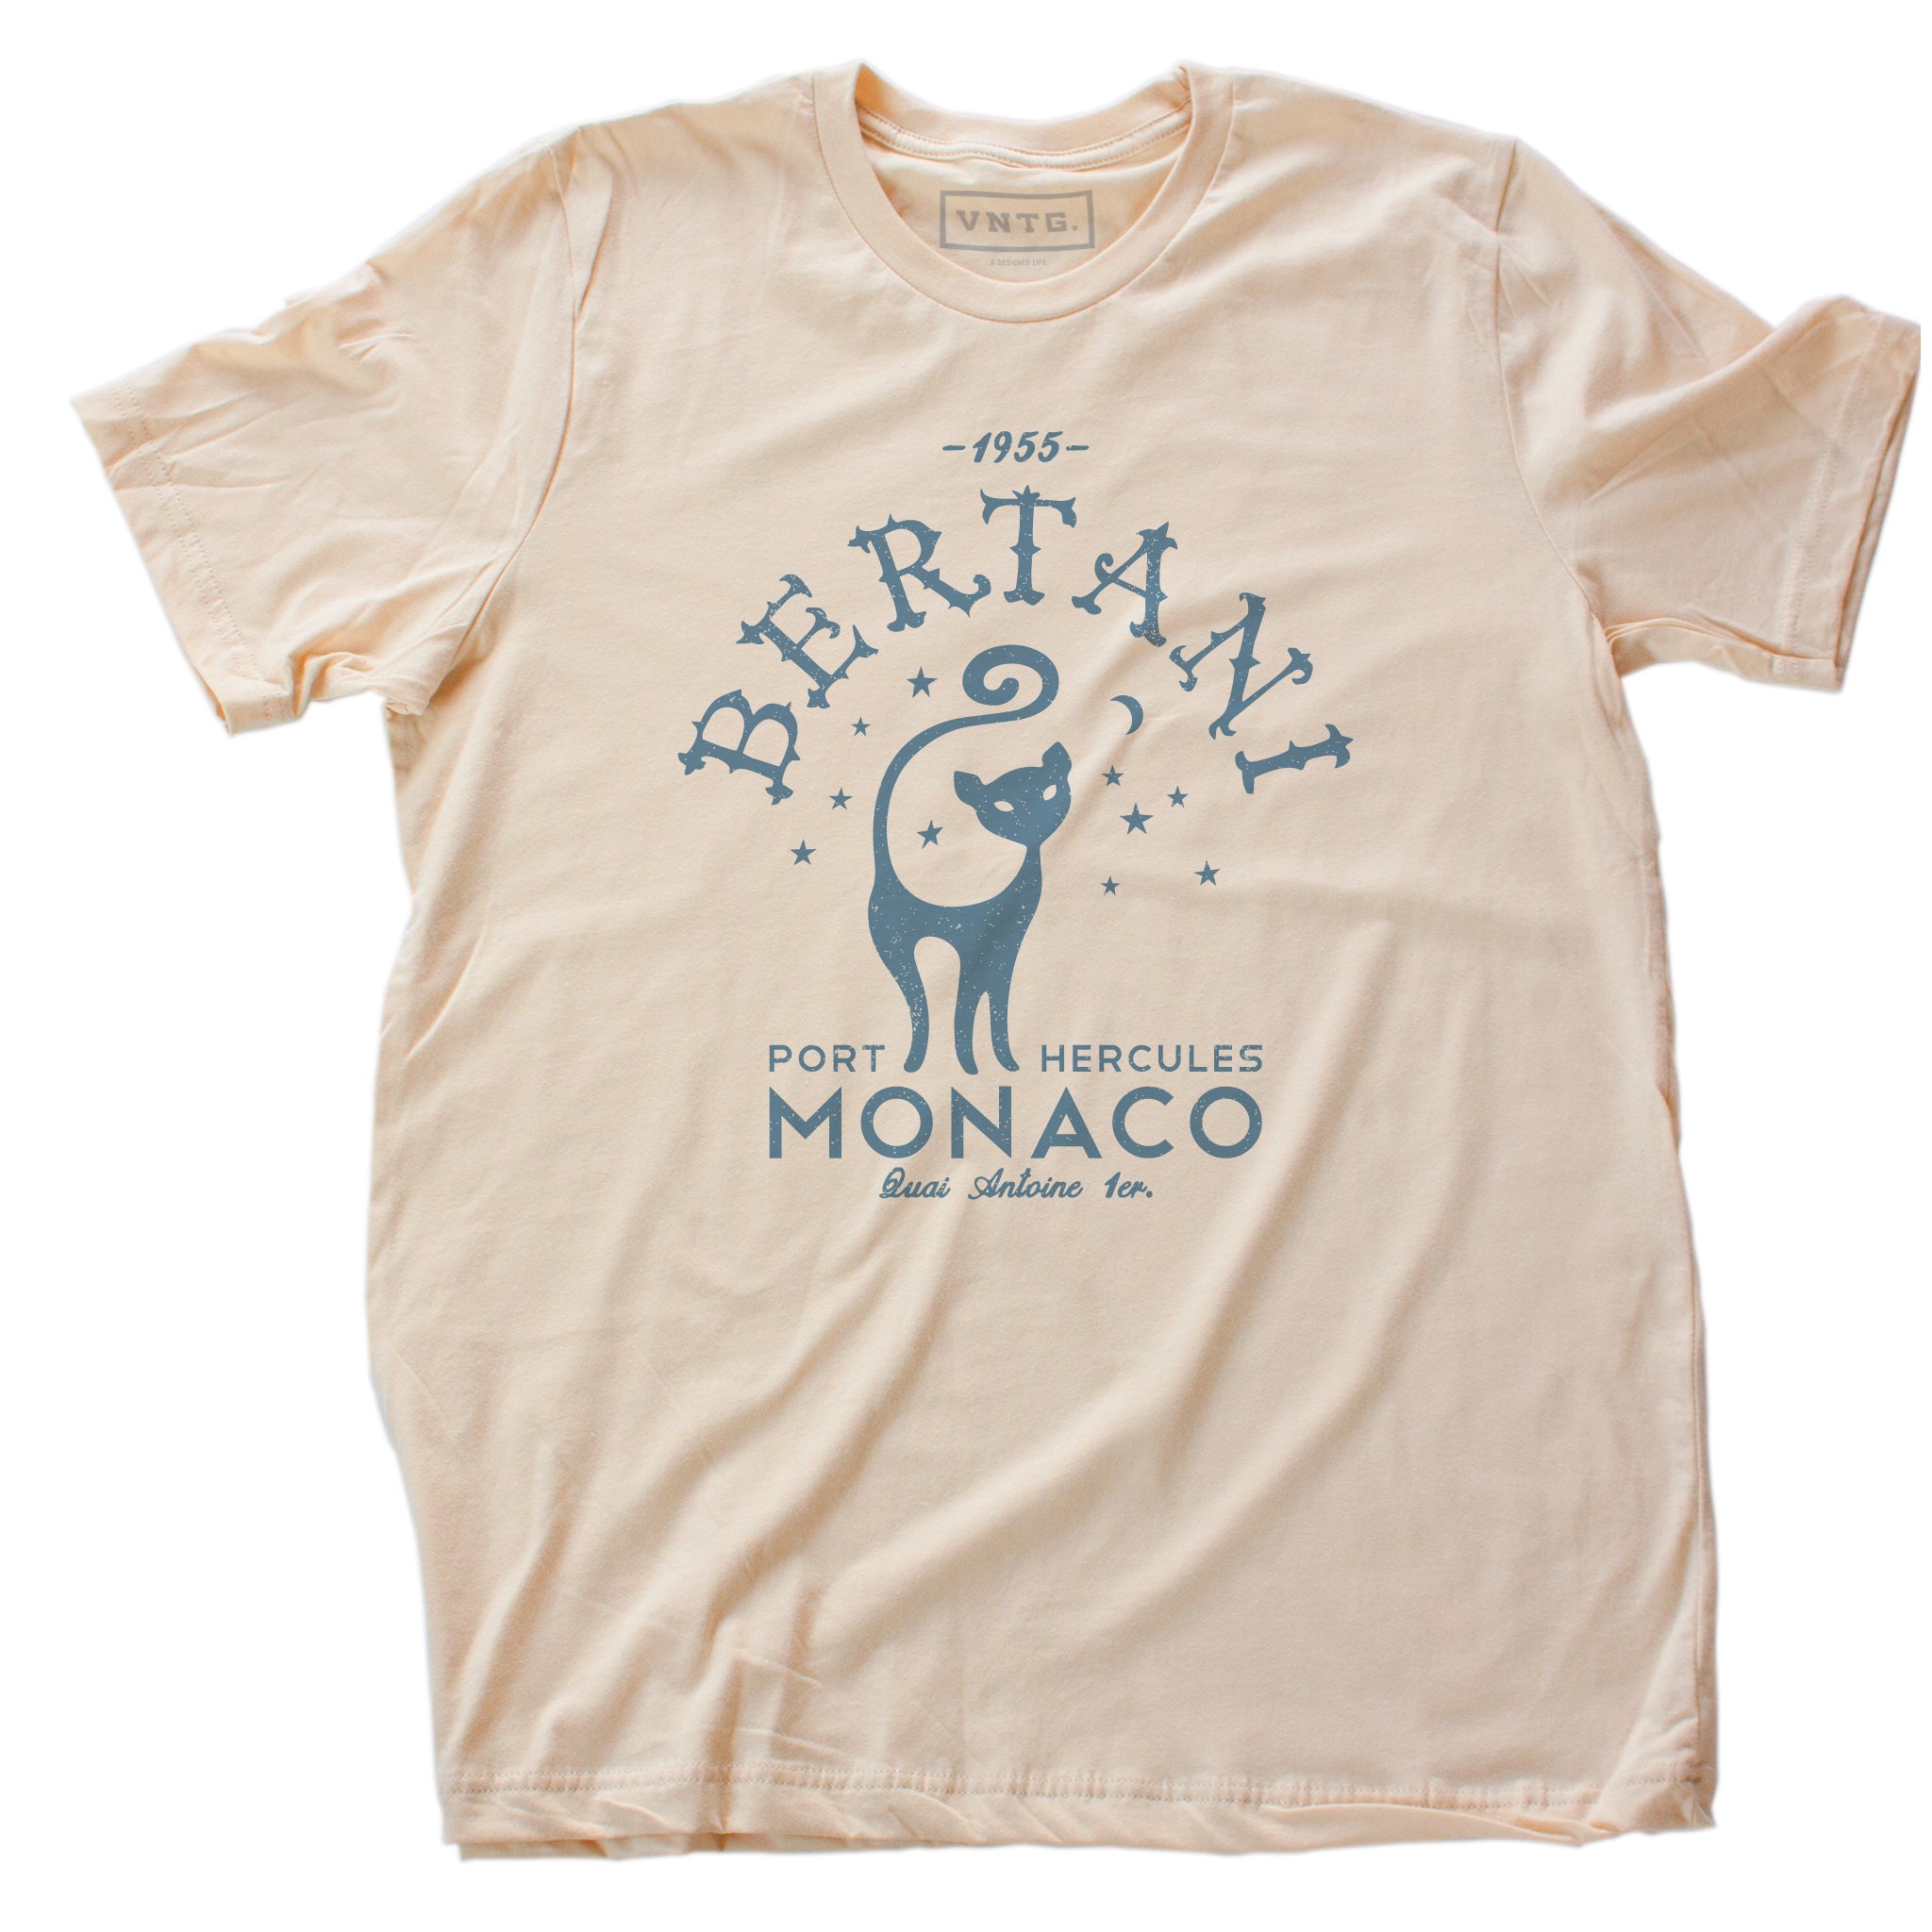 A vintage-look, retro t-shirt that was inspired by the Alfred Hitchcock film To Catch a Thief, and is a tribute to the restaurant Bertani owned by the friend of Cary Grant’s character in the film. It features old worlds typography around the image of a cat, meant to symbolize ‘John Robie The Cat’—the infamous cat burglar portrayed by Grant and loved by Grace Kelly. This shirt is elegant in Soft Cream, by fashion brand VNTG., from wolfsaint.net